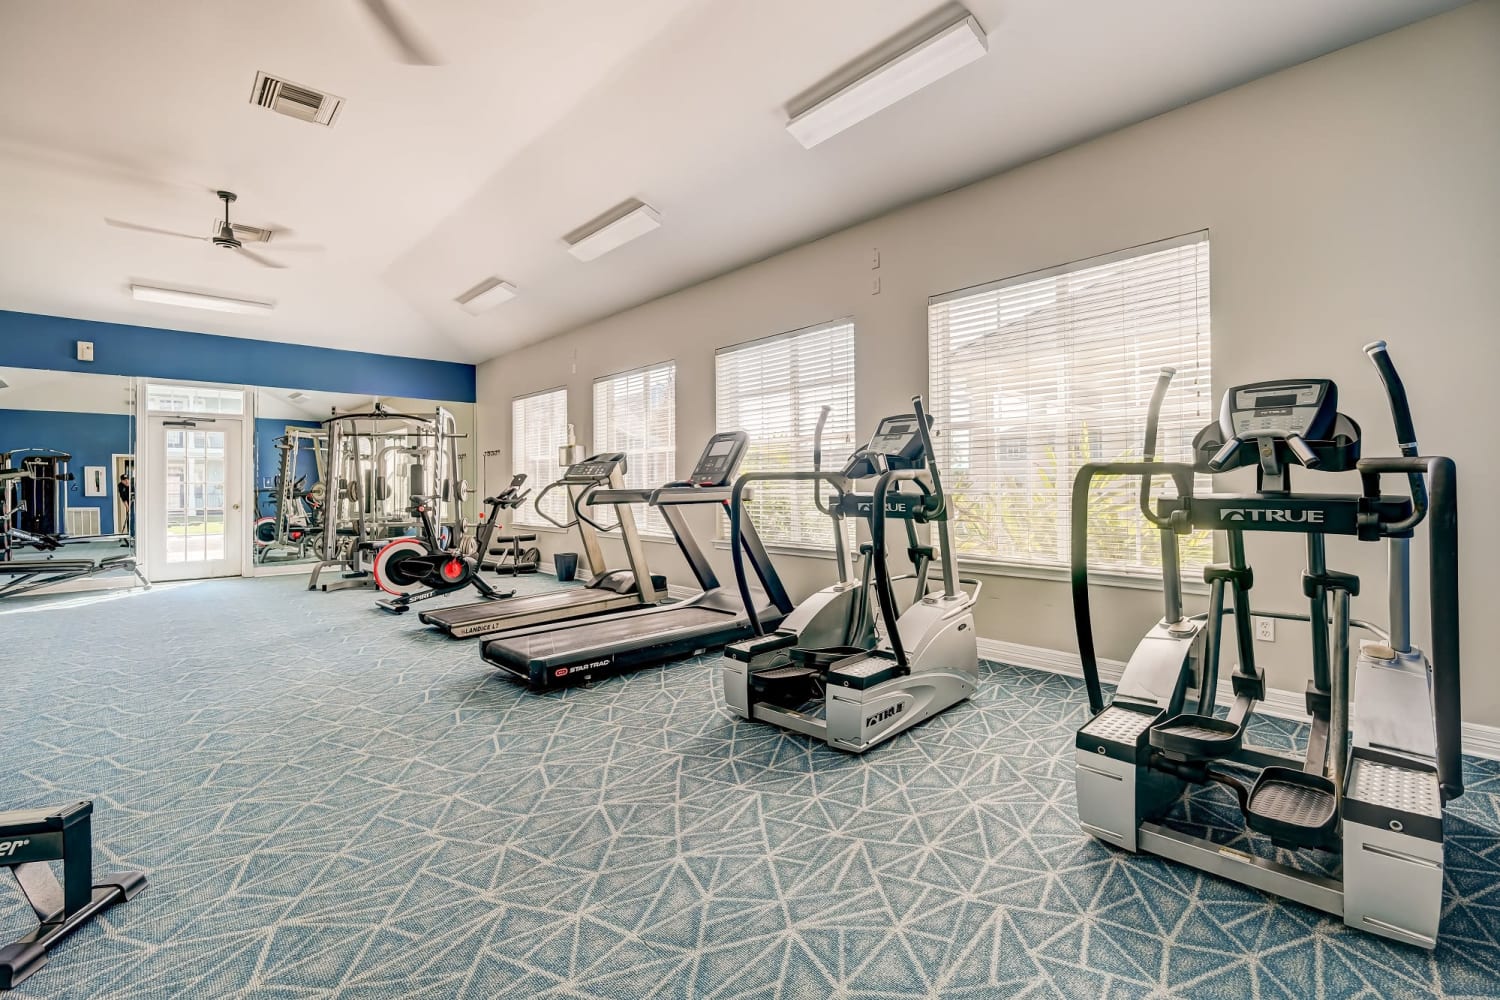 Newer fitness equipment in the fitness center at Audubon Lake Apartments